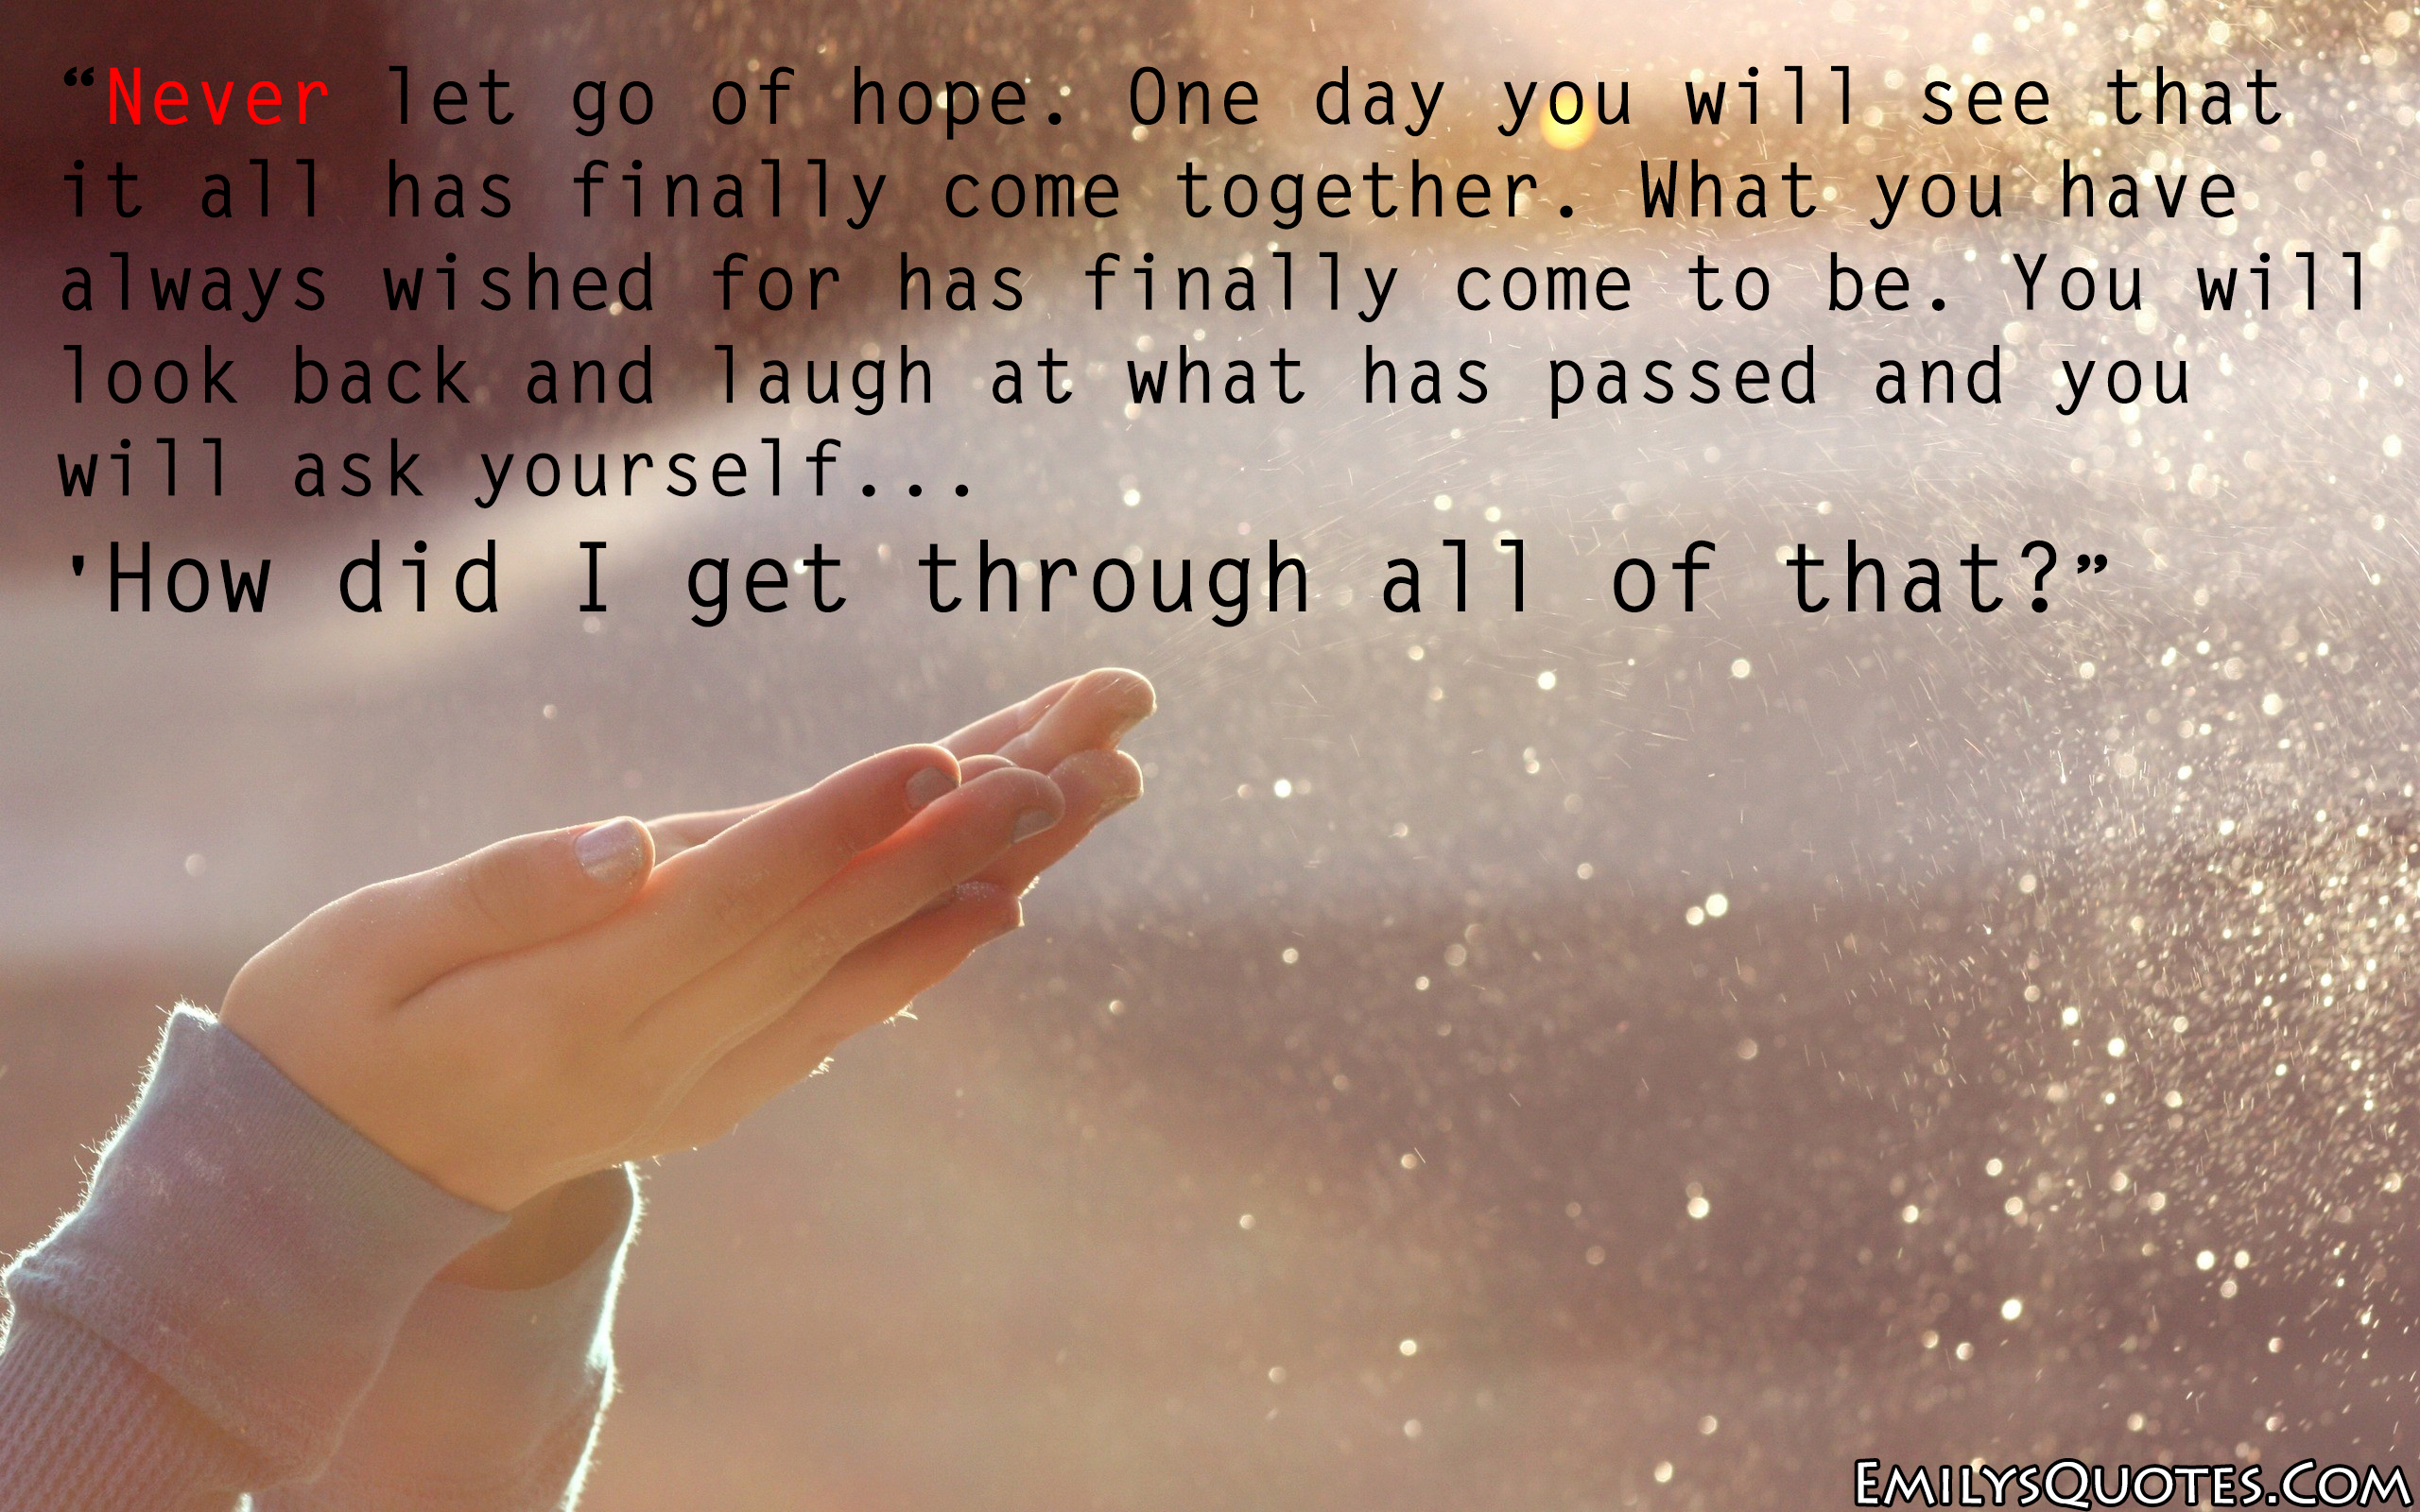 Never let go of hope. One day you will see that it all has finally come together. What you have always wished for